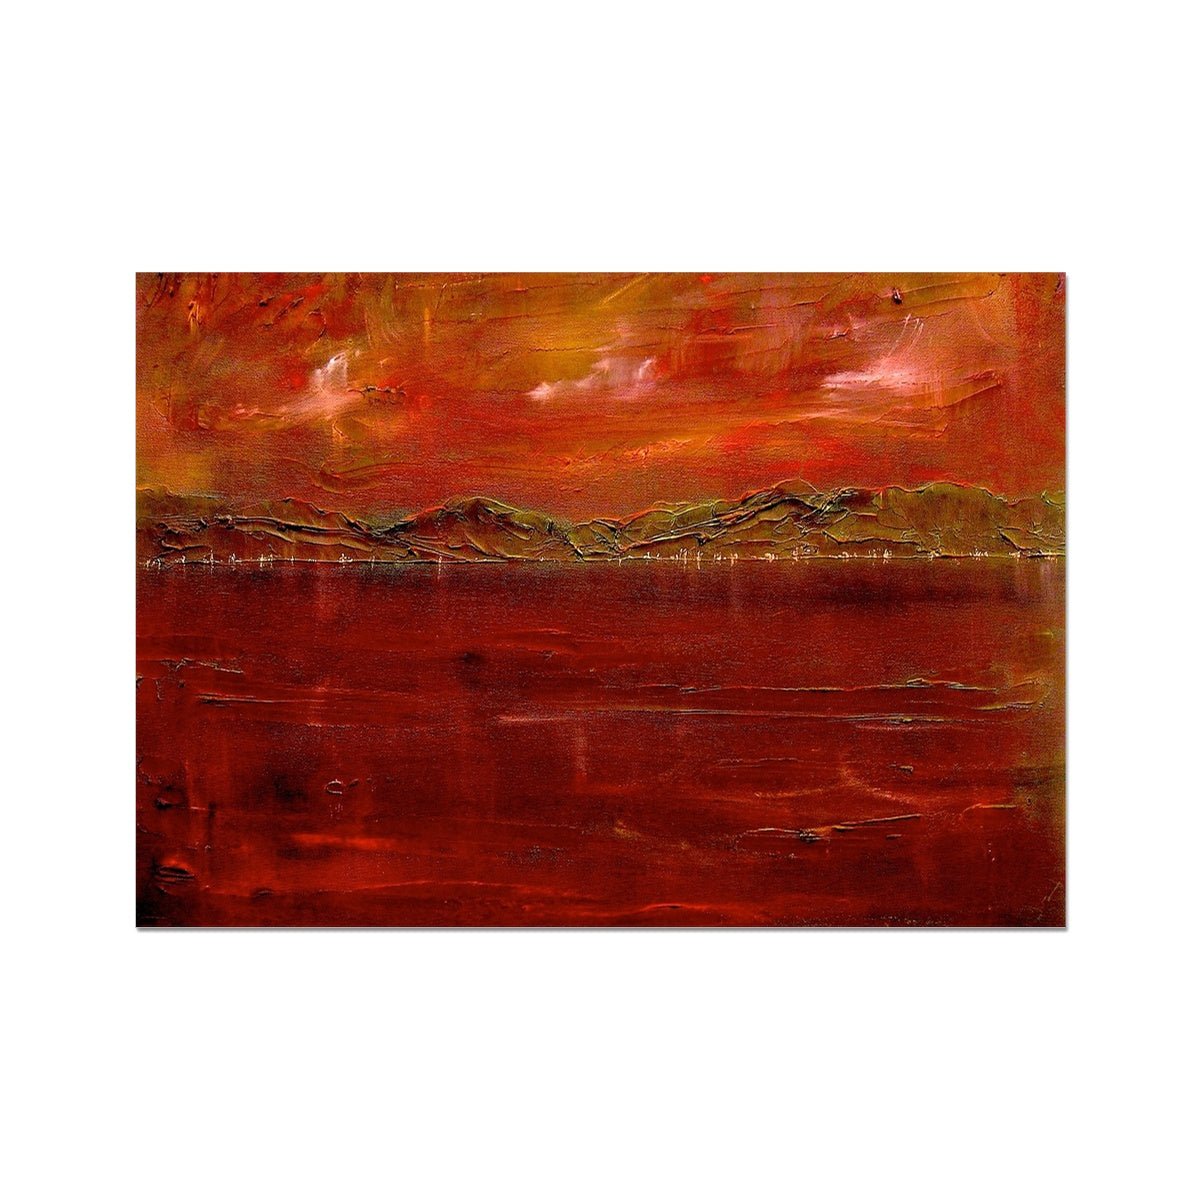 Deep Clyde Dusk Painting | Fine Art Prints From Scotland-Unframed Prints-River Clyde Art Gallery-A2 Landscape-Paintings, Prints, Homeware, Art Gifts From Scotland By Scottish Artist Kevin Hunter